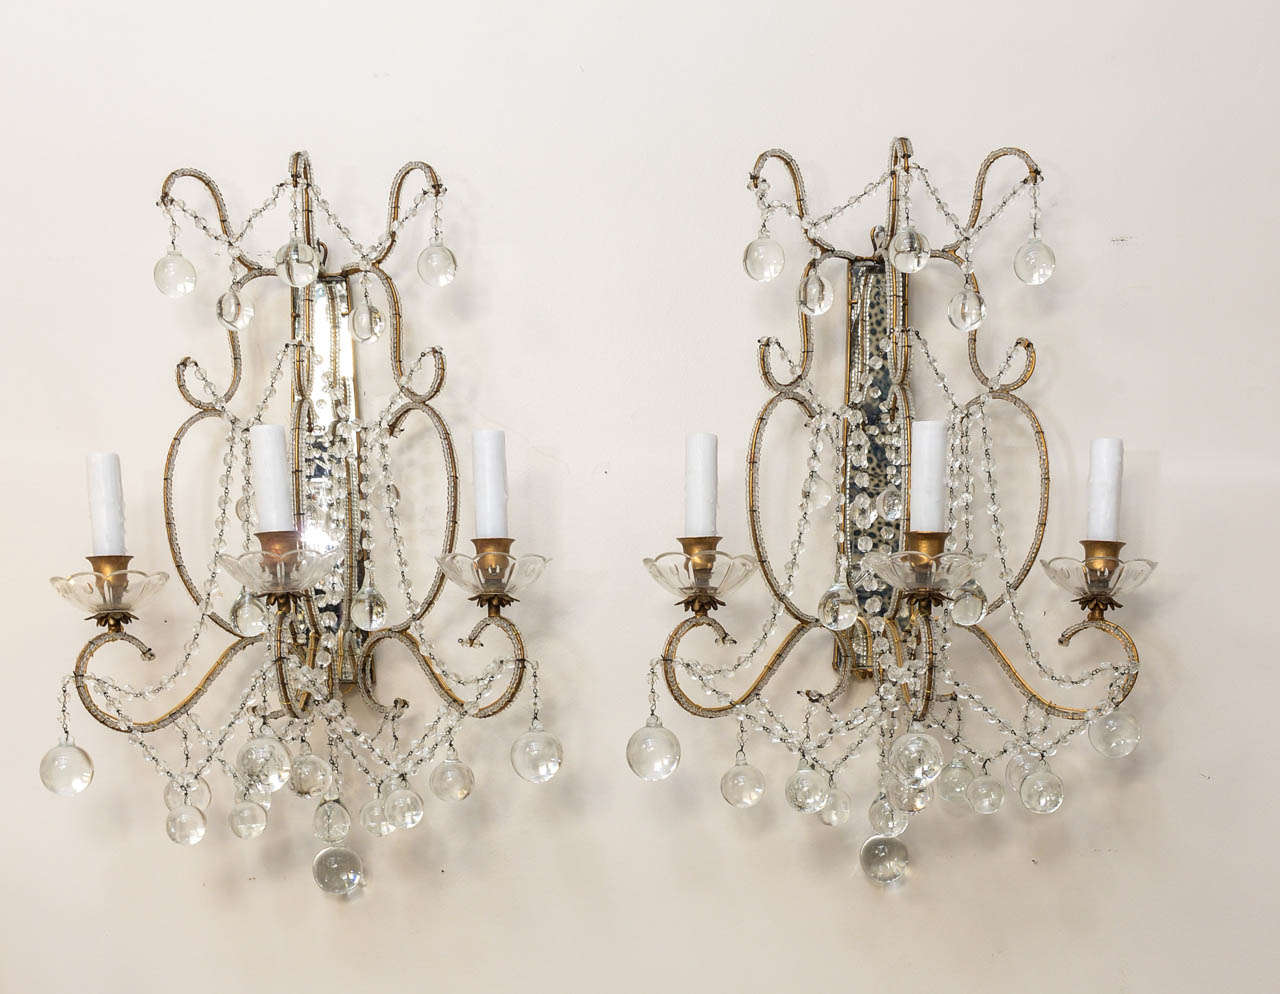 Exquisite pair of beaded crystal sconces with gilded metal frames, mirrored back plates and crystal ball drops.